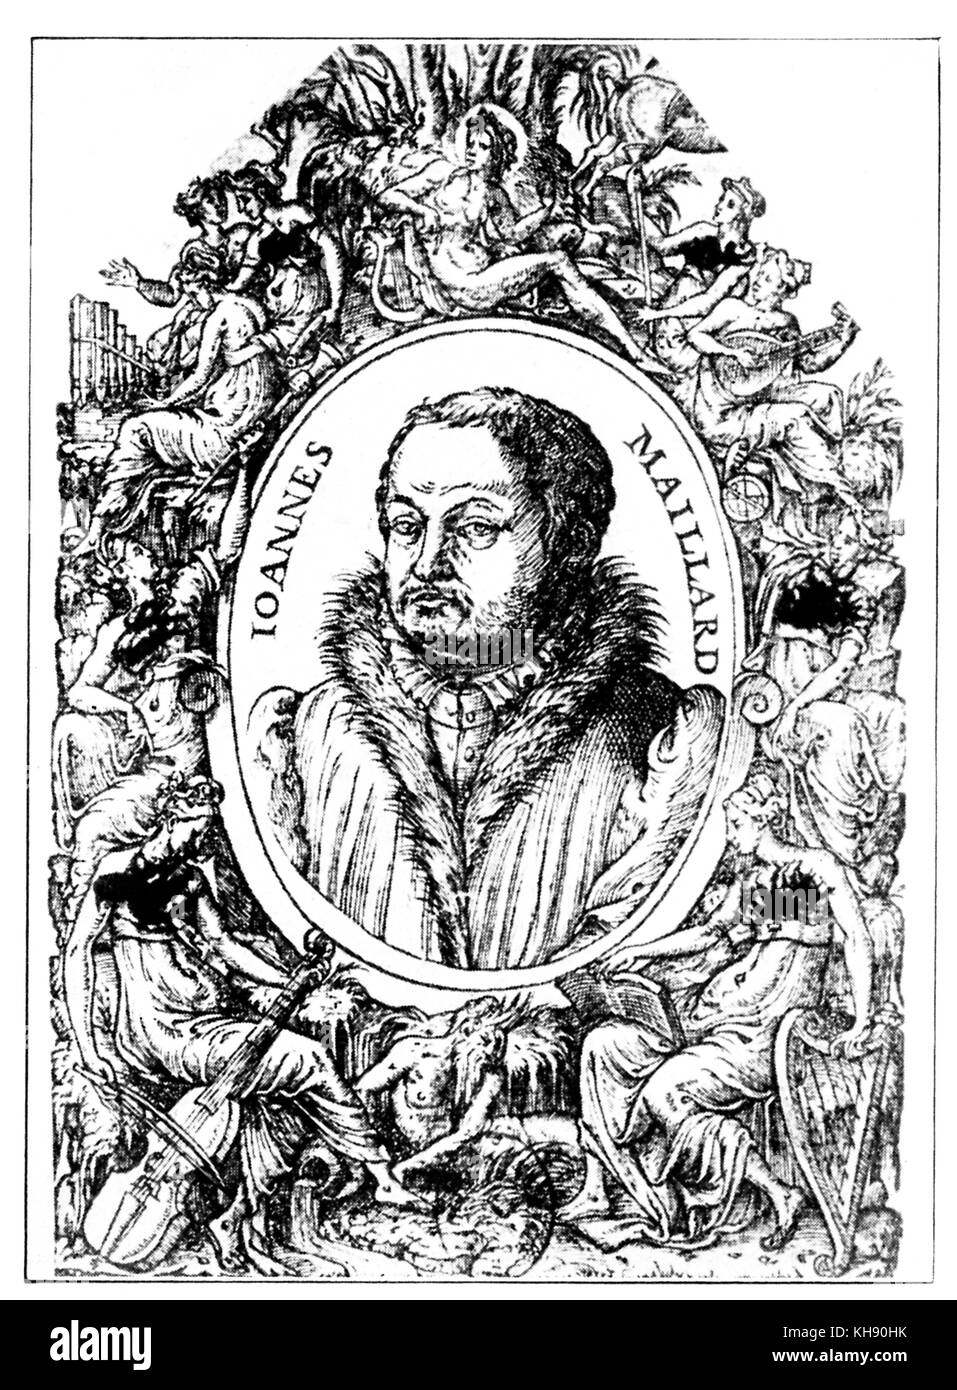 Jean Maillard, French composer of masses, motets and chansons (c. 1550). Unsigned contemporary engraving. French Renaissance composer c. 1515 – after 1570 Stock Photo